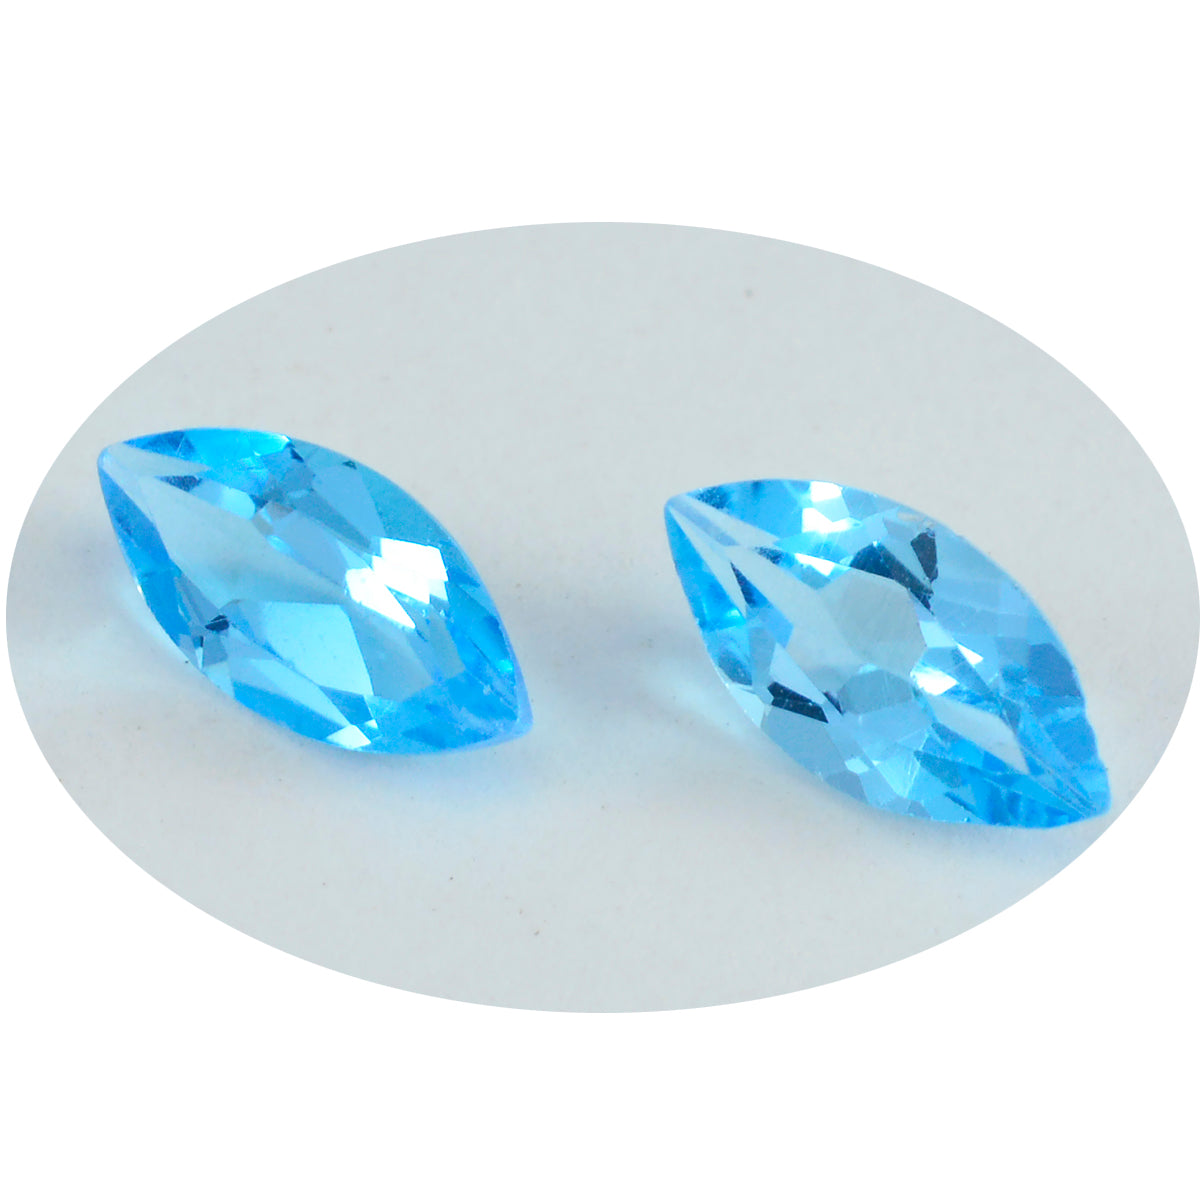 Riyogems 1PC Natural Blue Topaz Faceted 5x10 mm Marquise Shape awesome Quality Stone